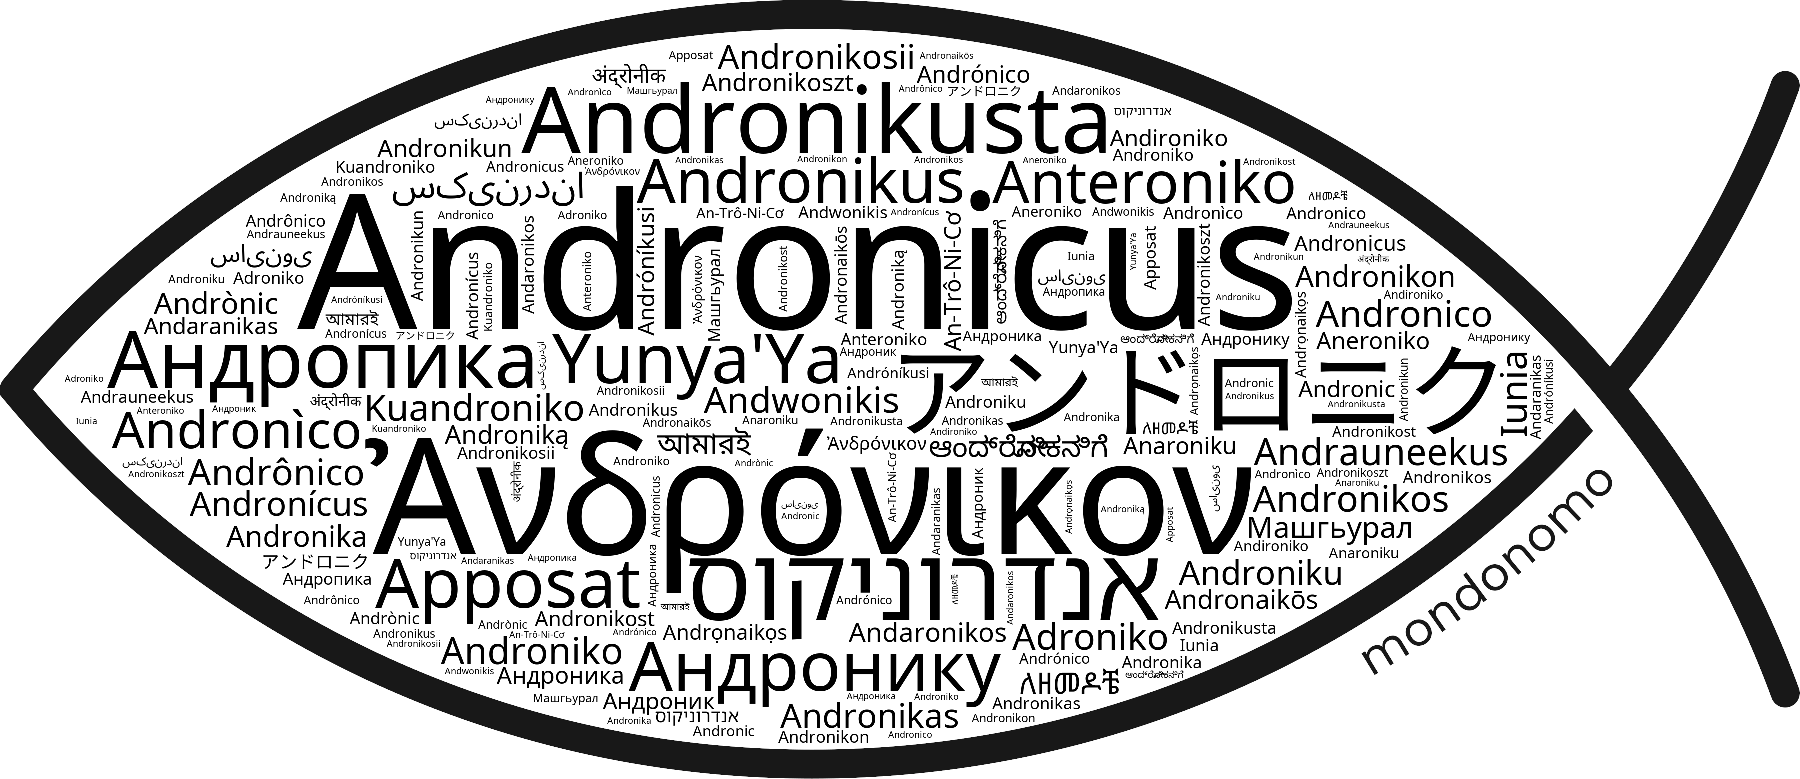 Name Andronicus in the world's Bibles